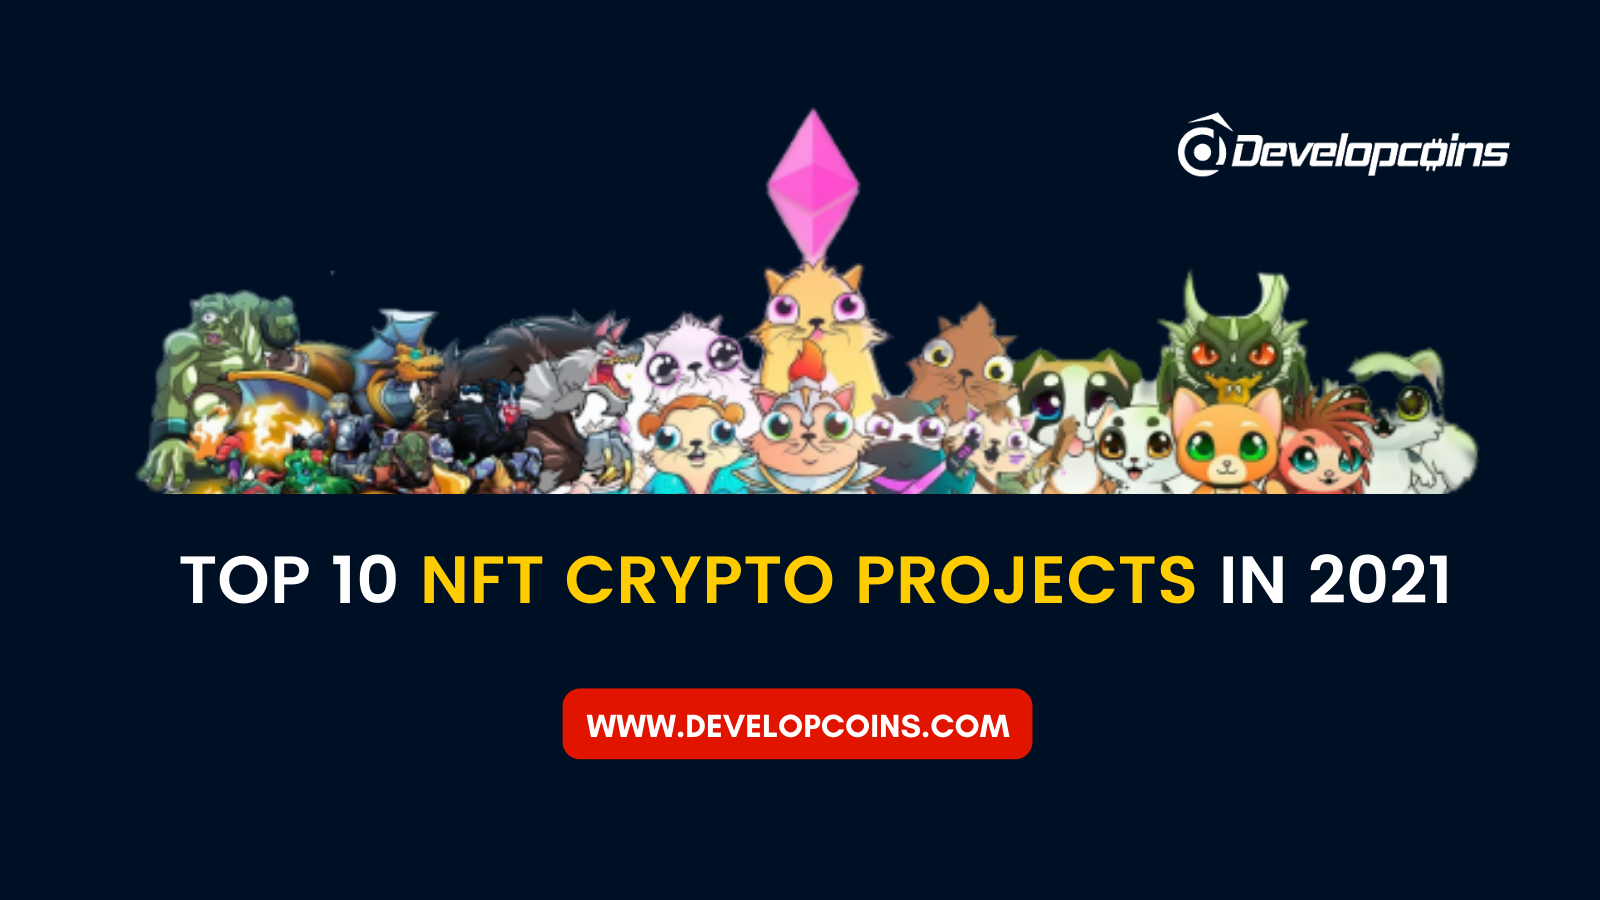 Top 10 NFT Crypto Projects in 2021